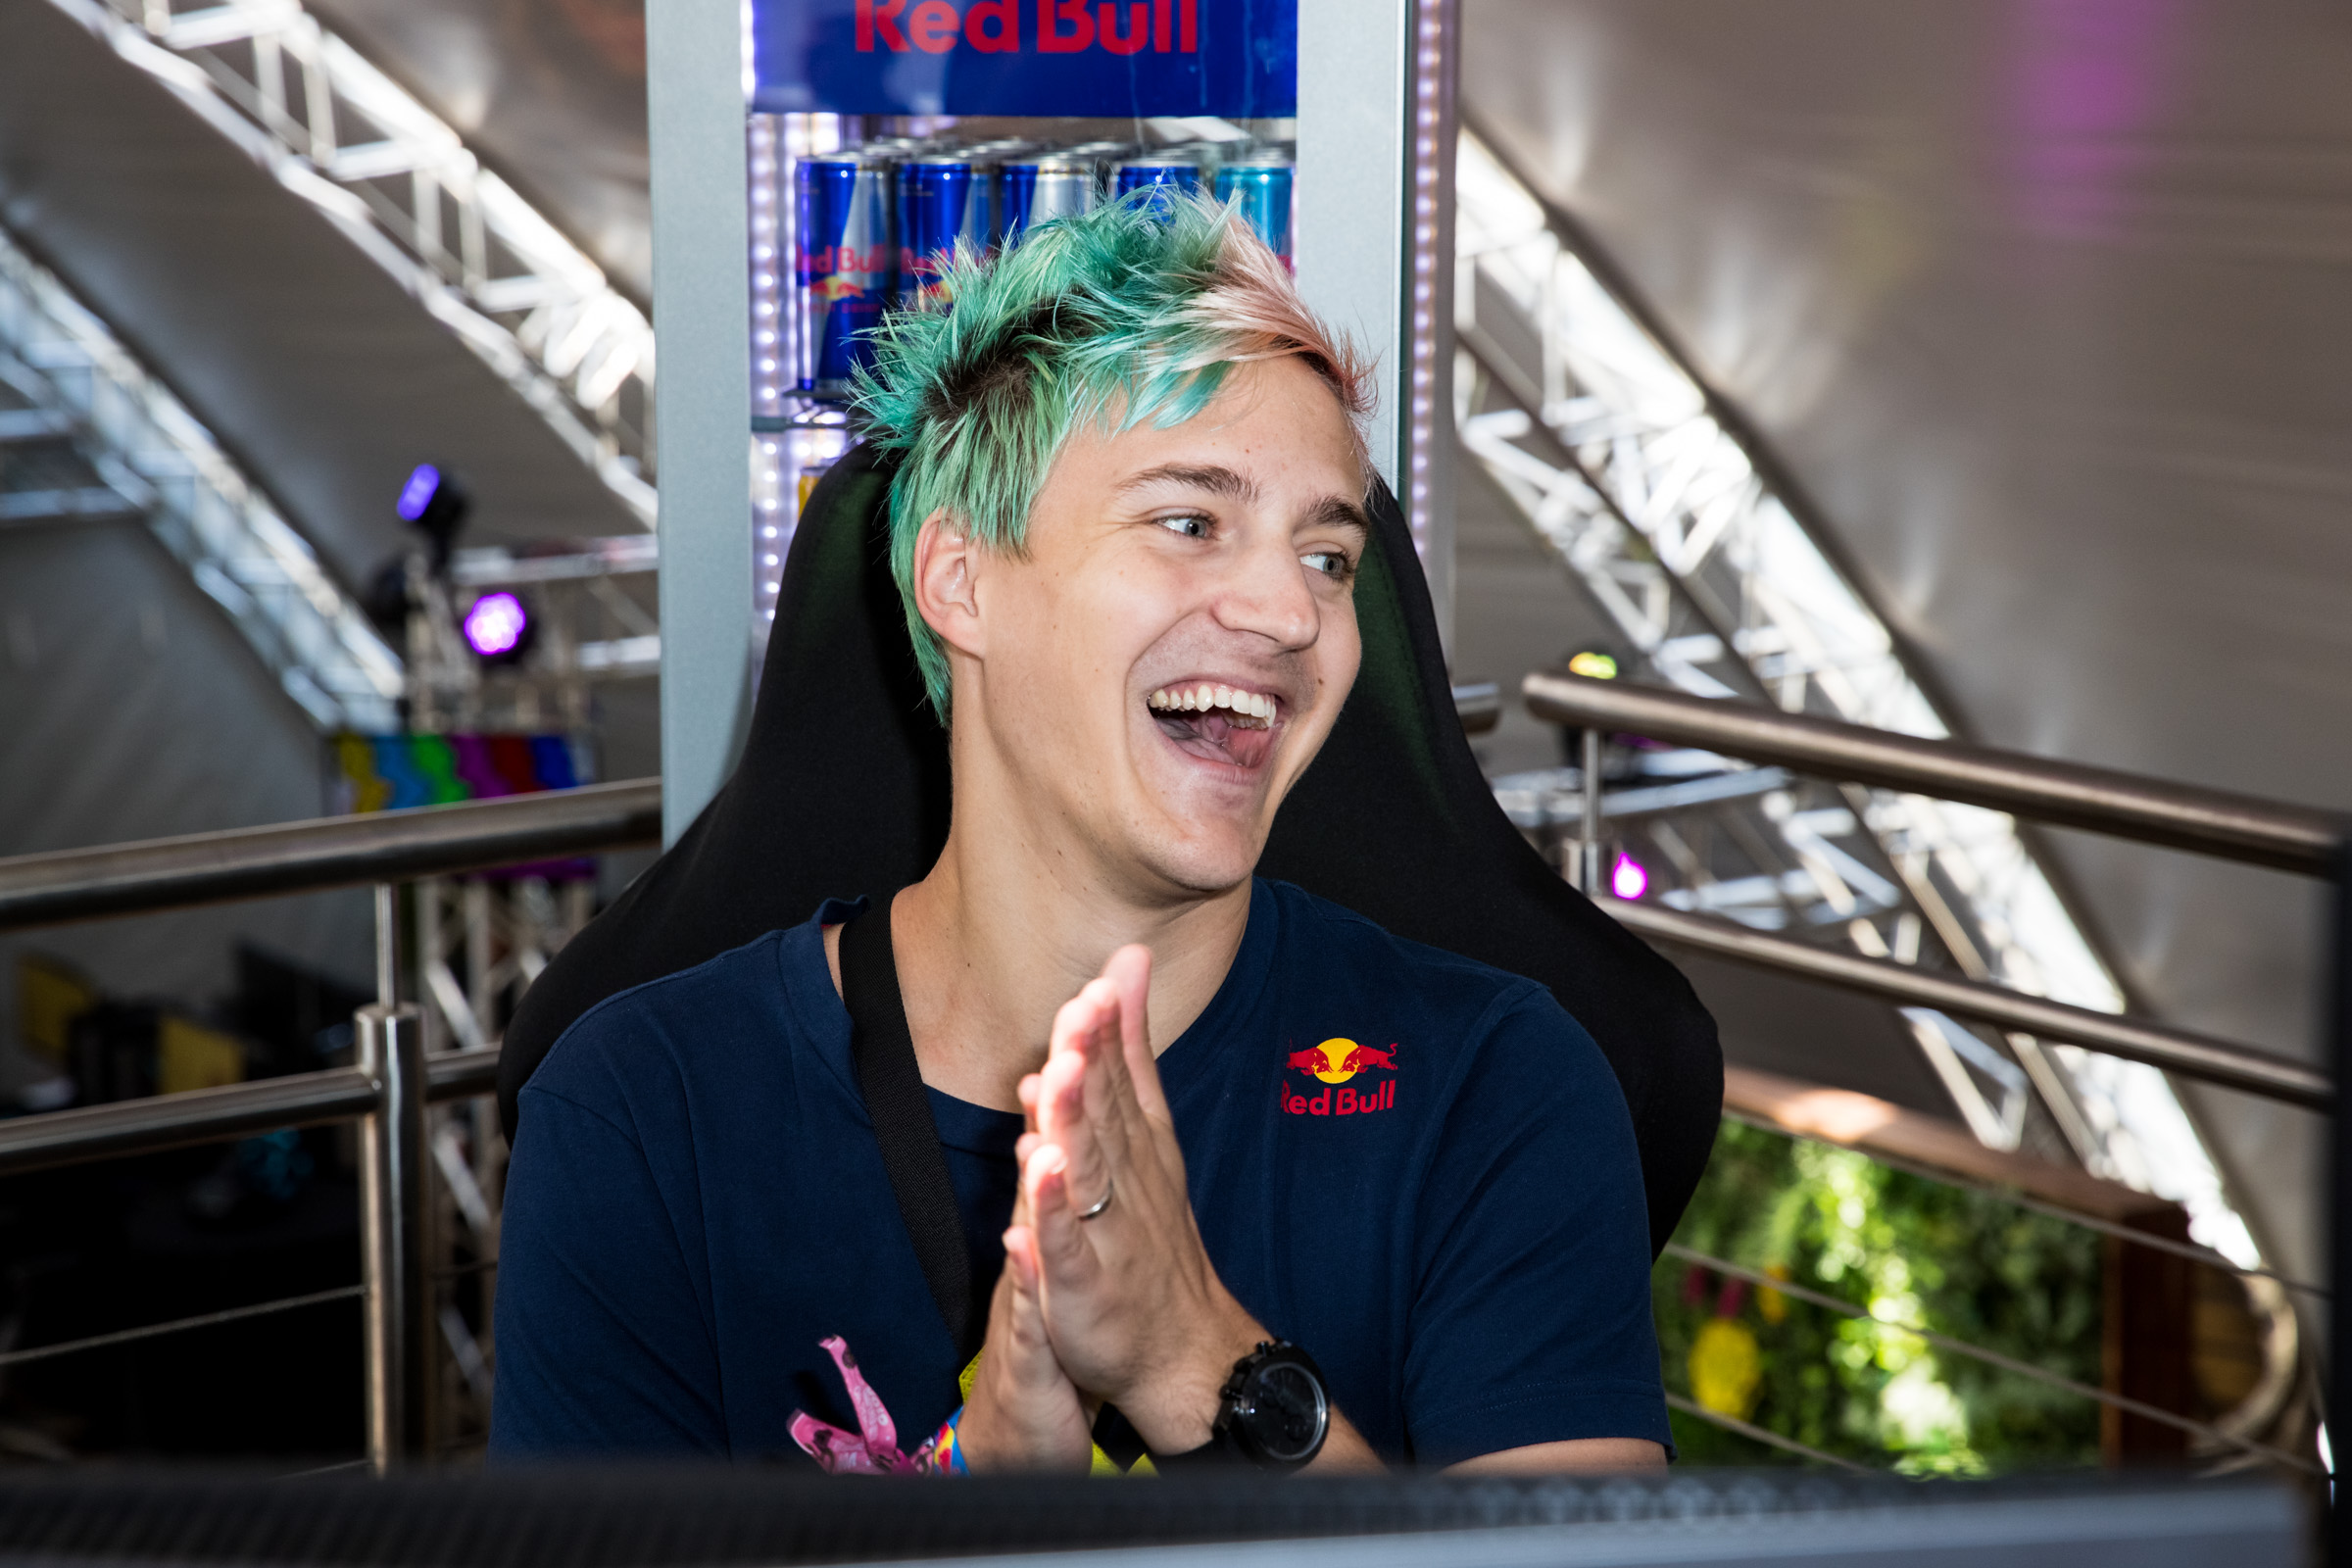 Ninja Gave His Phone Number To The Entire Internet But It Was